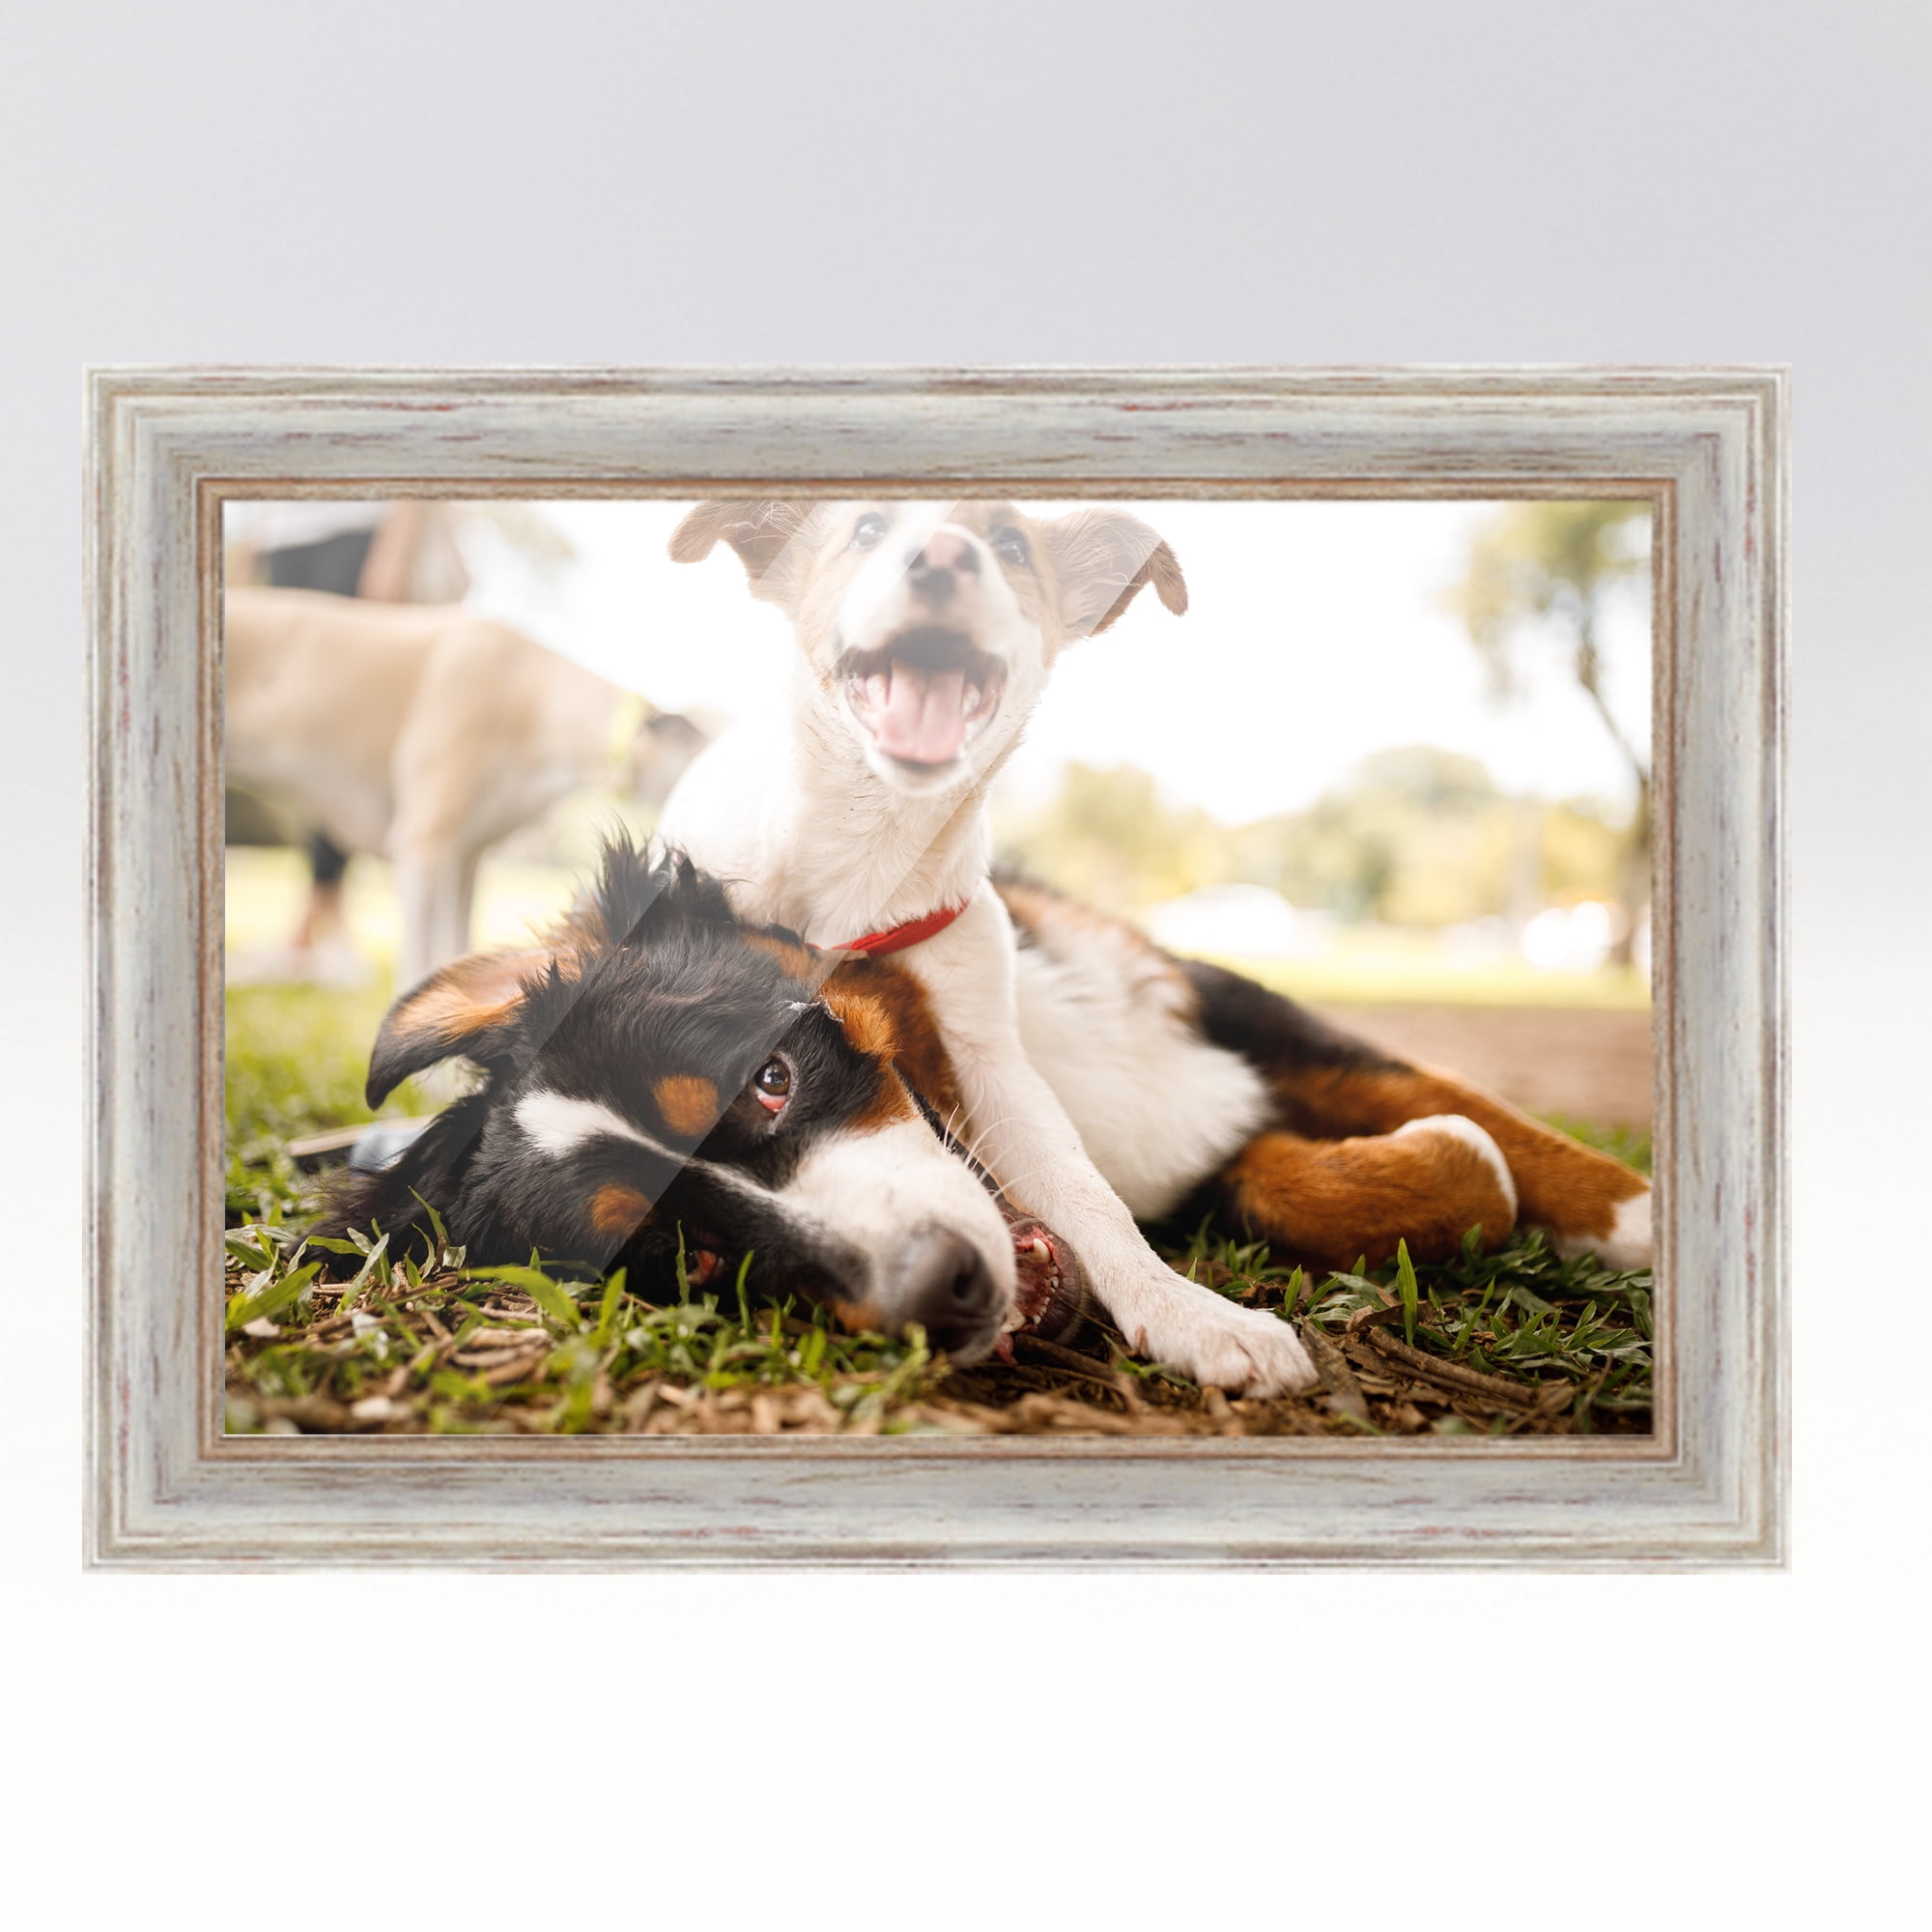 CustomPictureFrames.com 18x24 Frame White Solid Wood Picture Frame Includes  UV Acrylic Front Acid Free Foam Backing Board Hanging Hardware no Mat